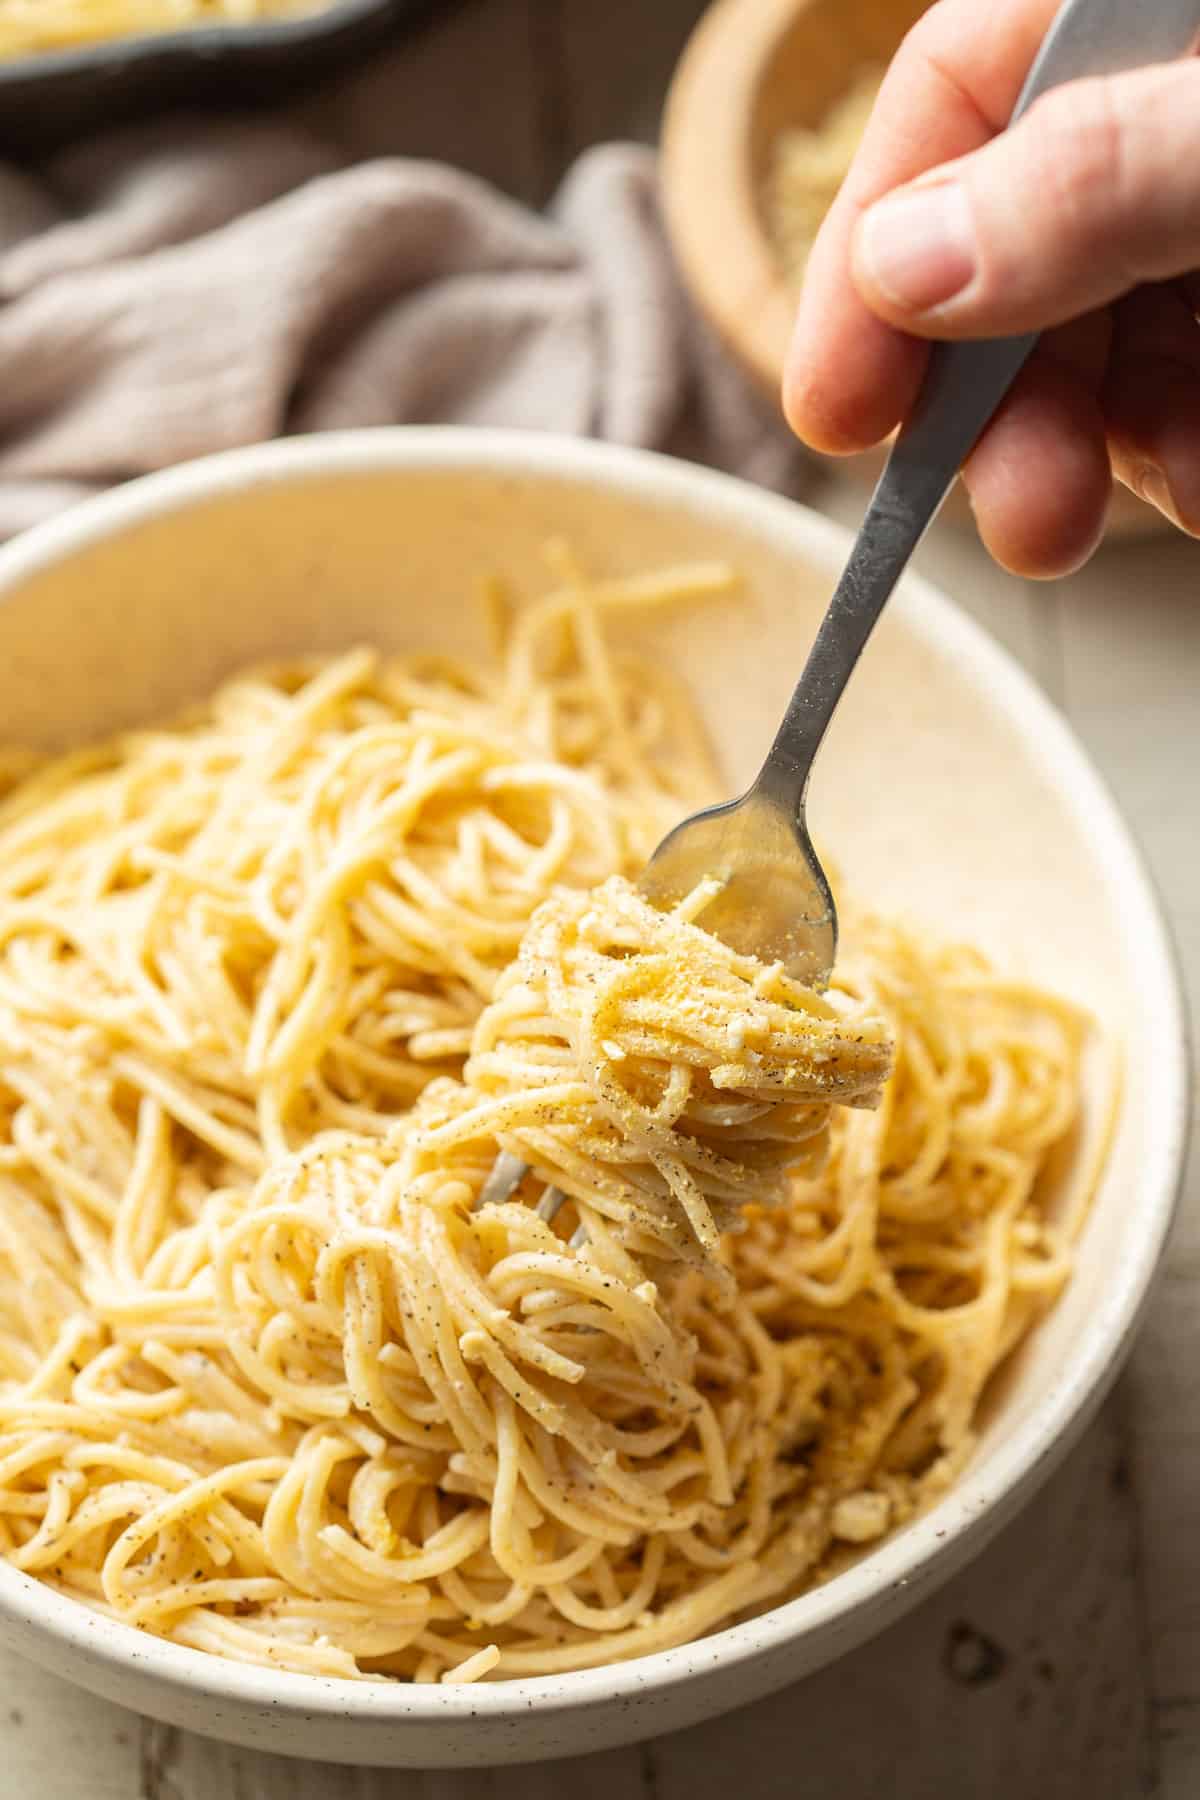 Hand wrapping a cluster of noodles around a fork in a bowl of Vegan Cacio e Pepe.